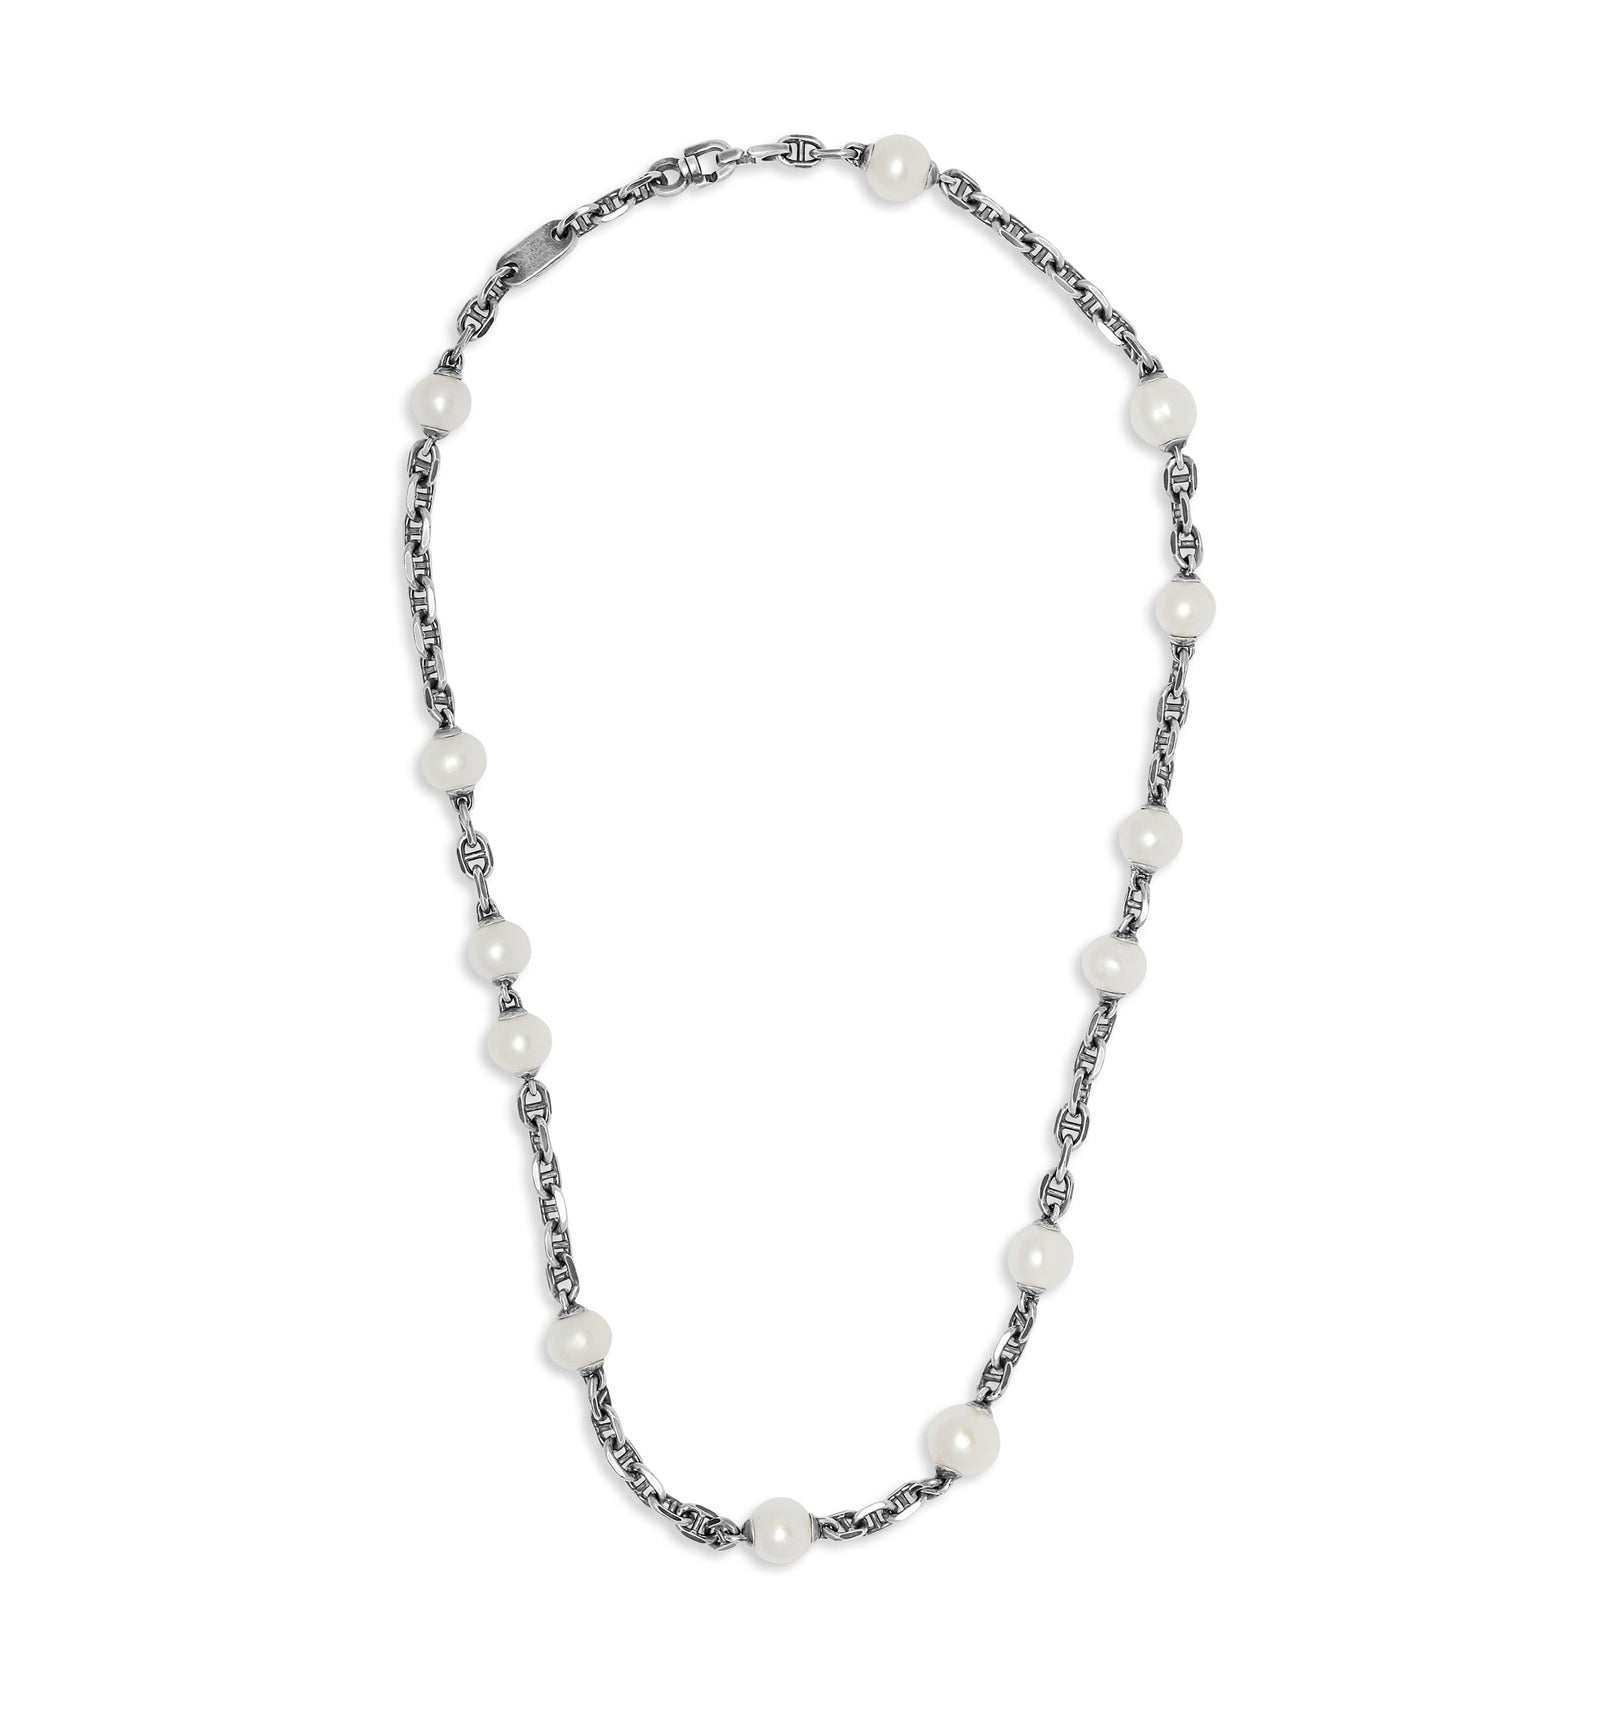 Sicar Necklace | White Pearls | Oxidized Sterling Silver